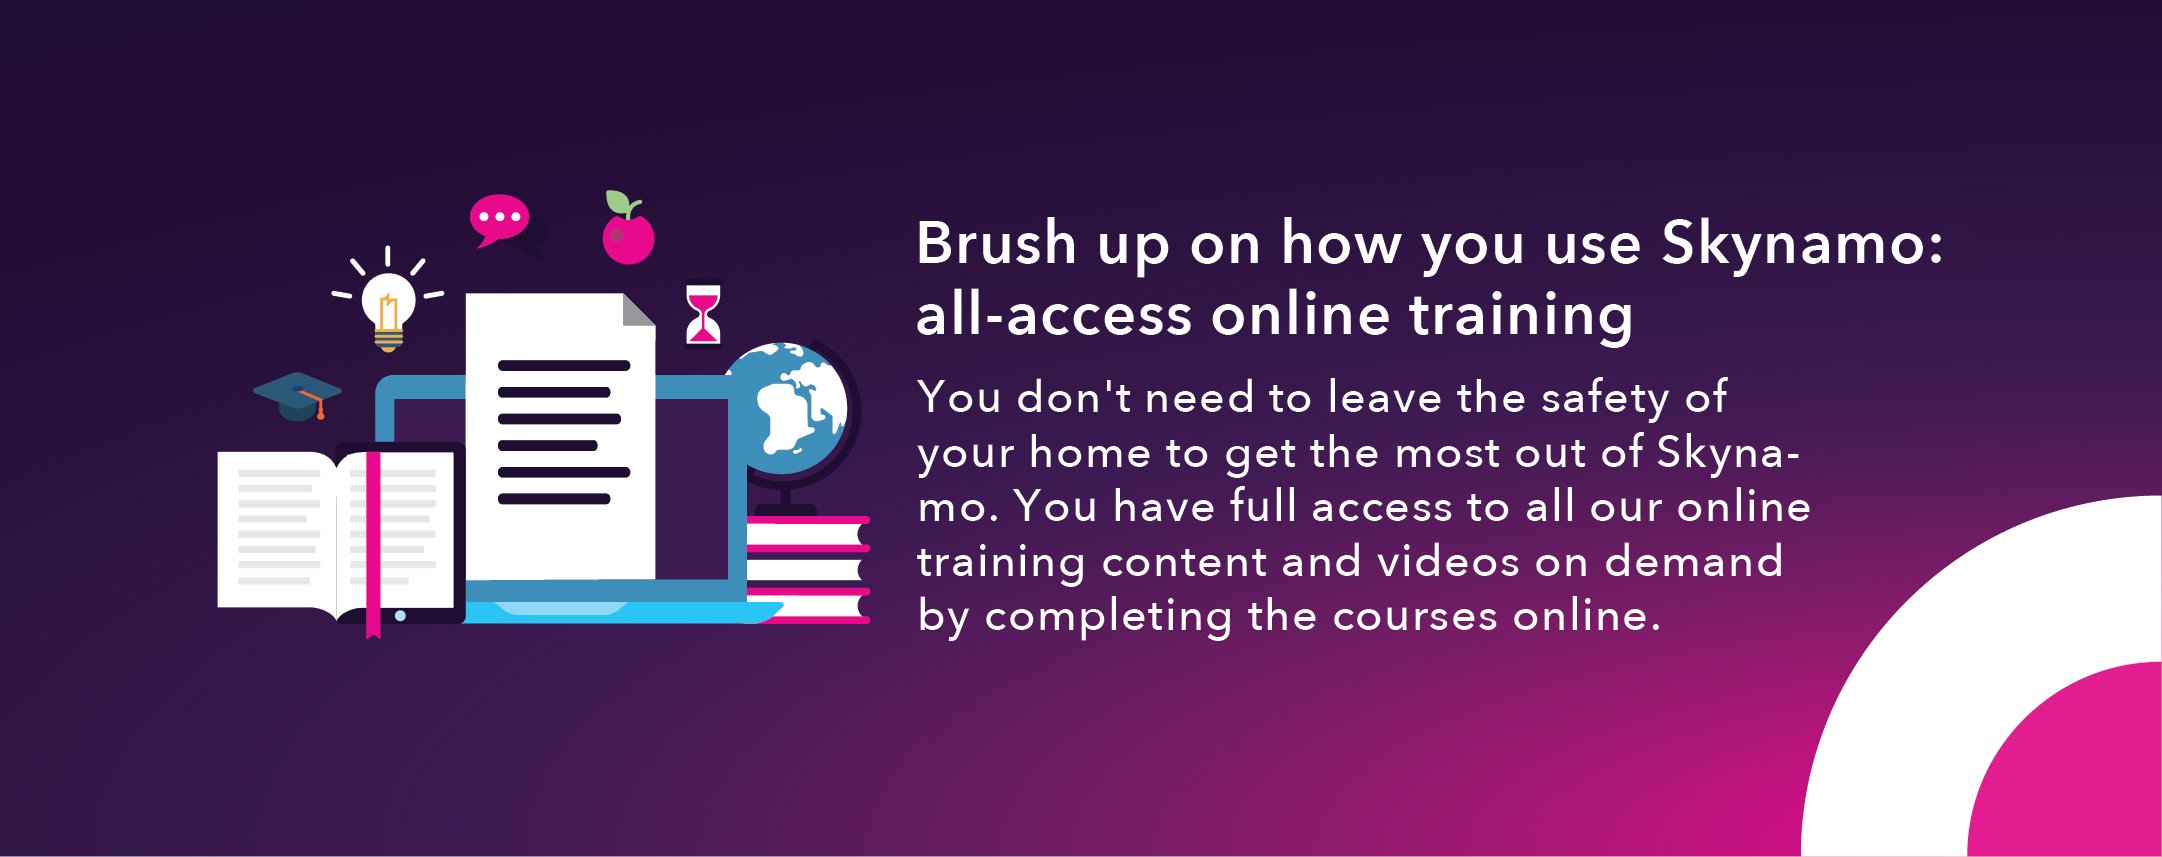 8. Brush up on how you use Skynamo: all-access online training